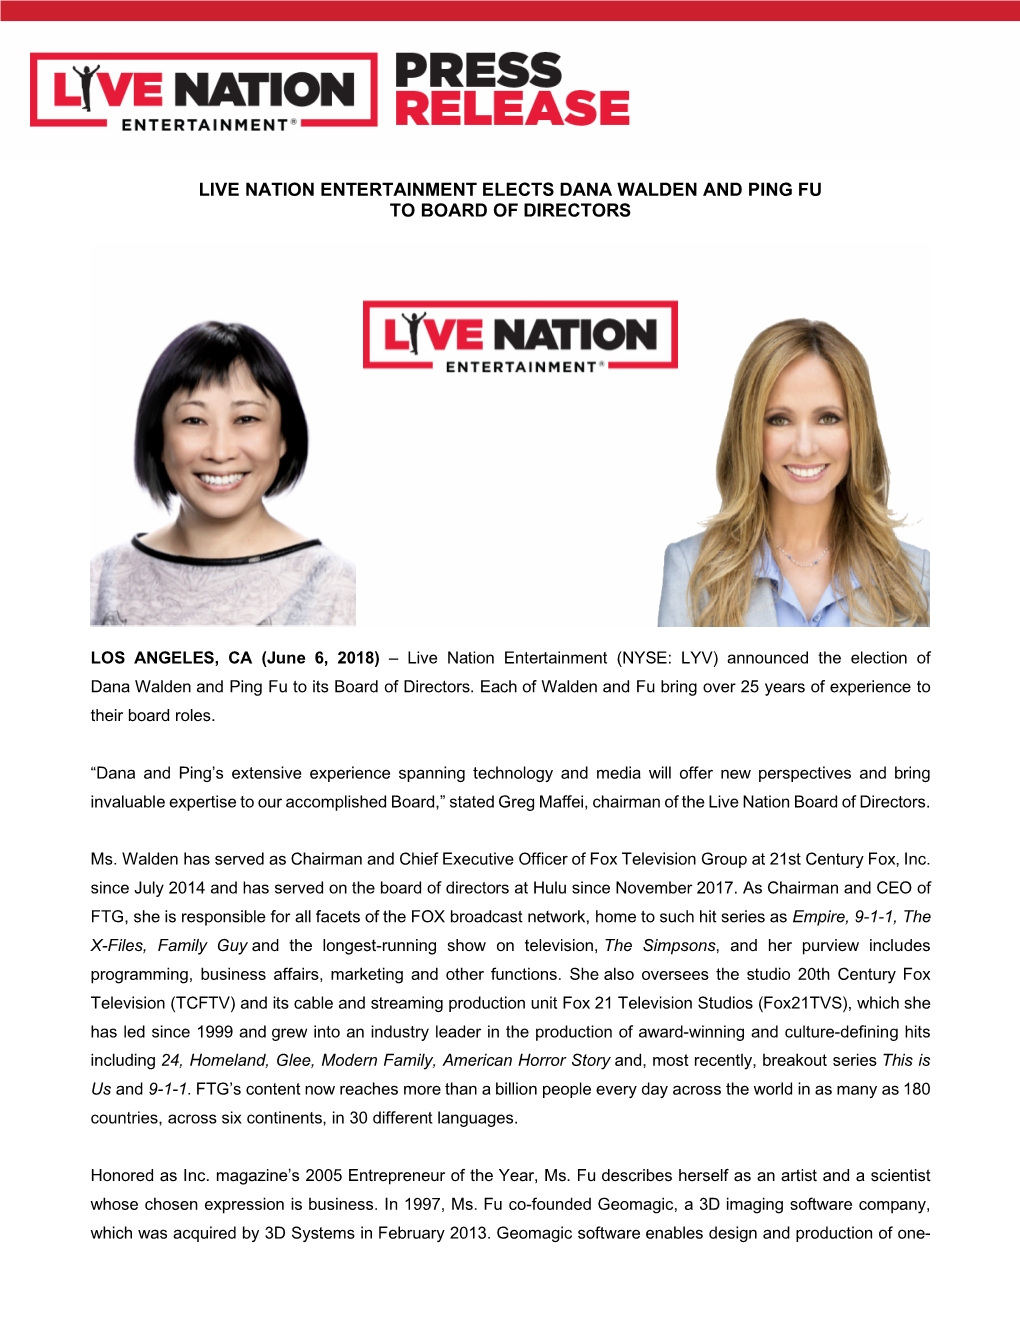 Live Nation Entertainment Elects Dana Walden and Ping Fu to Board of Directors